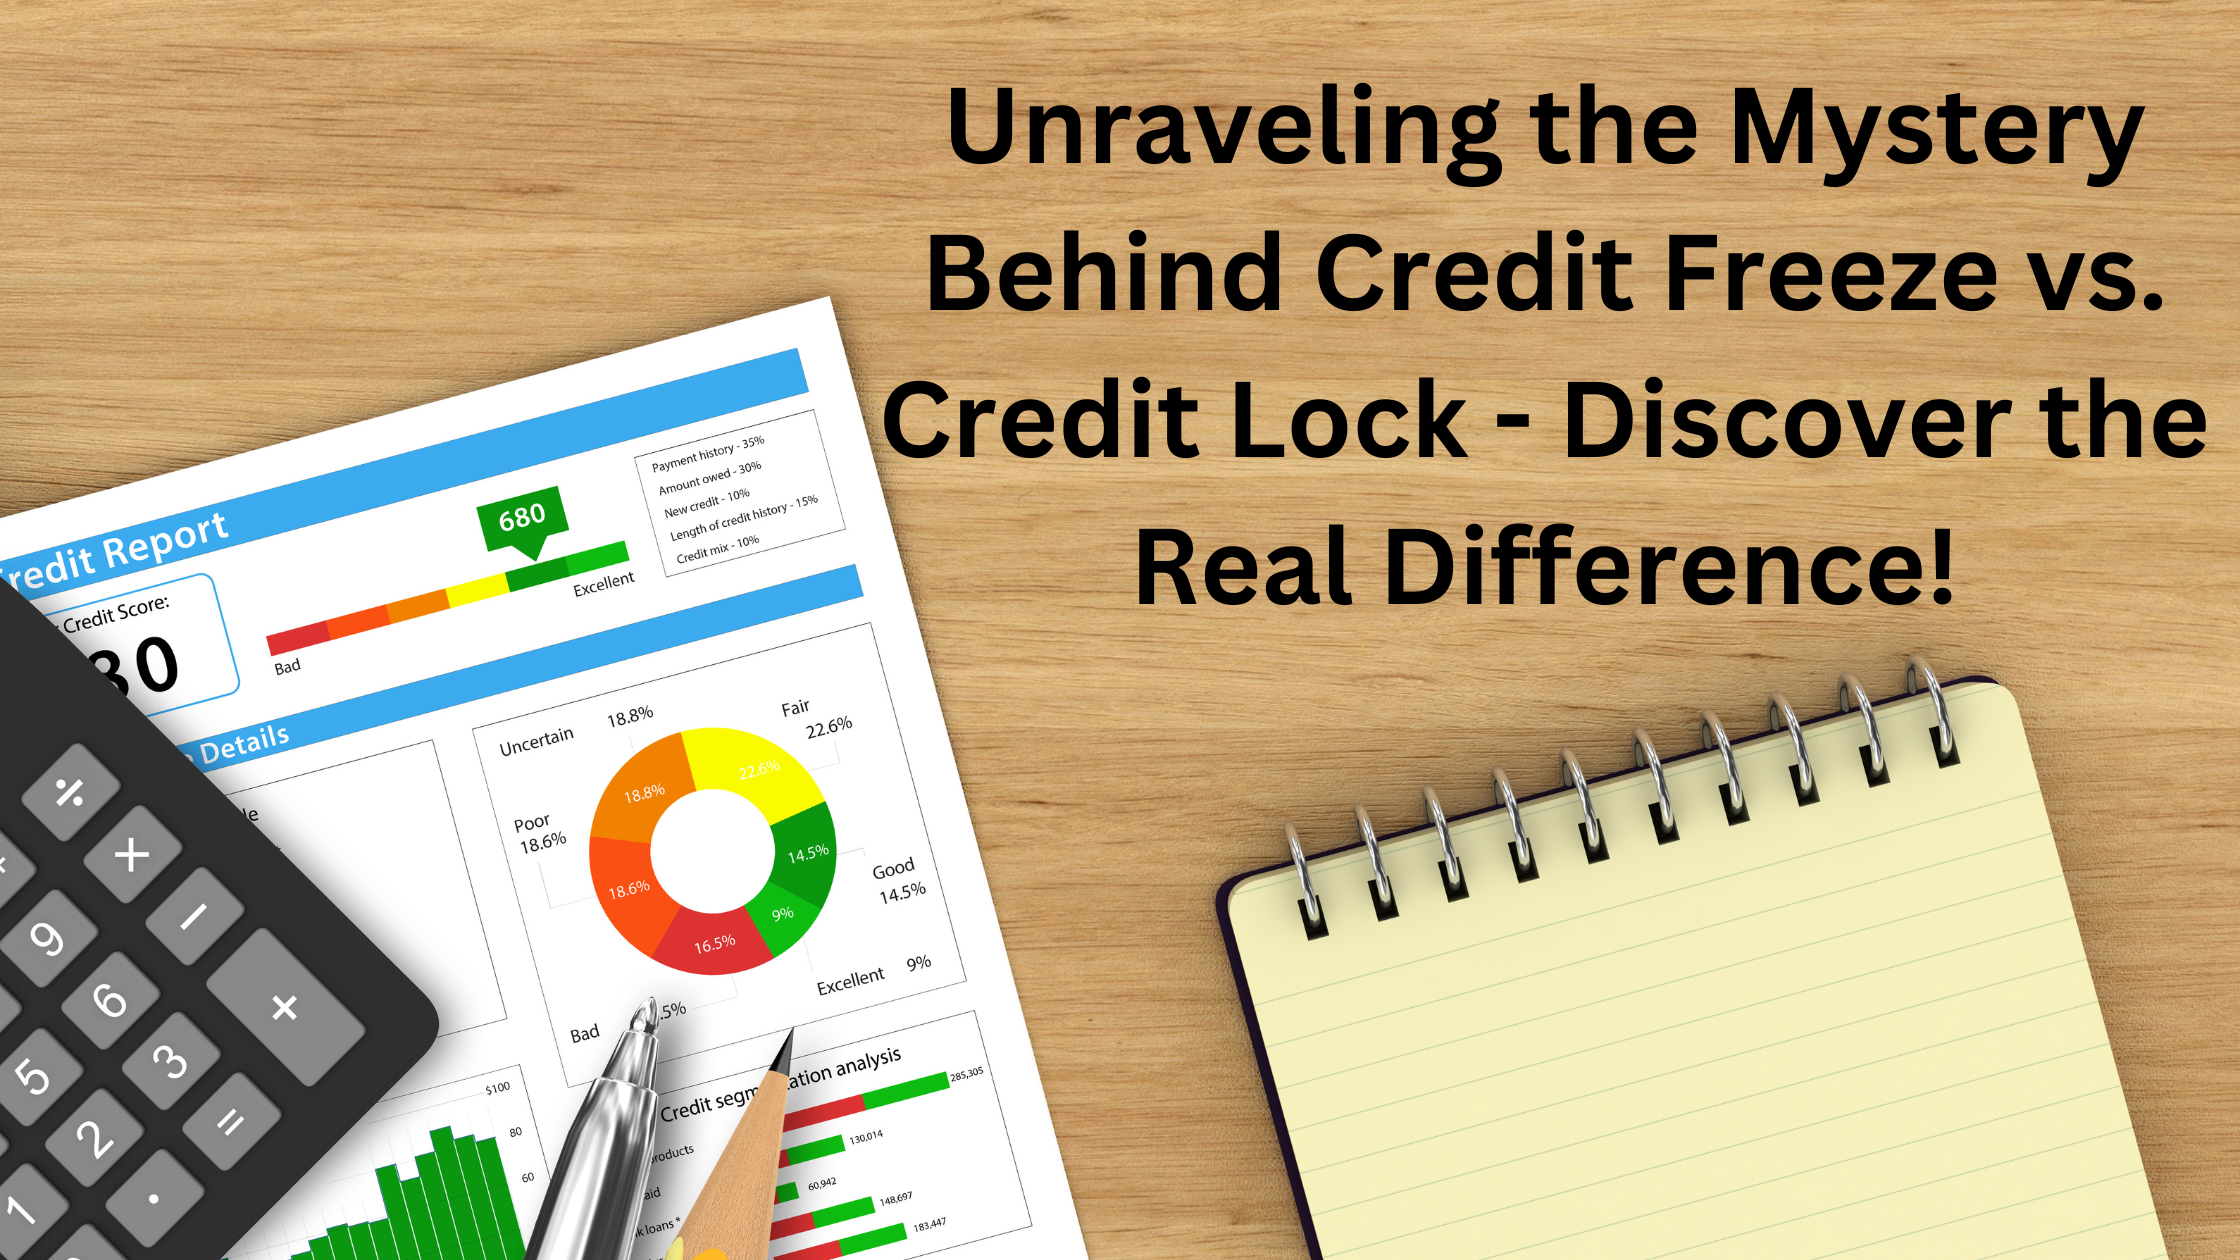 Unraveling the Mystery Behind Credit Freeze vs. Credit Lock - Discover the Real Difference!